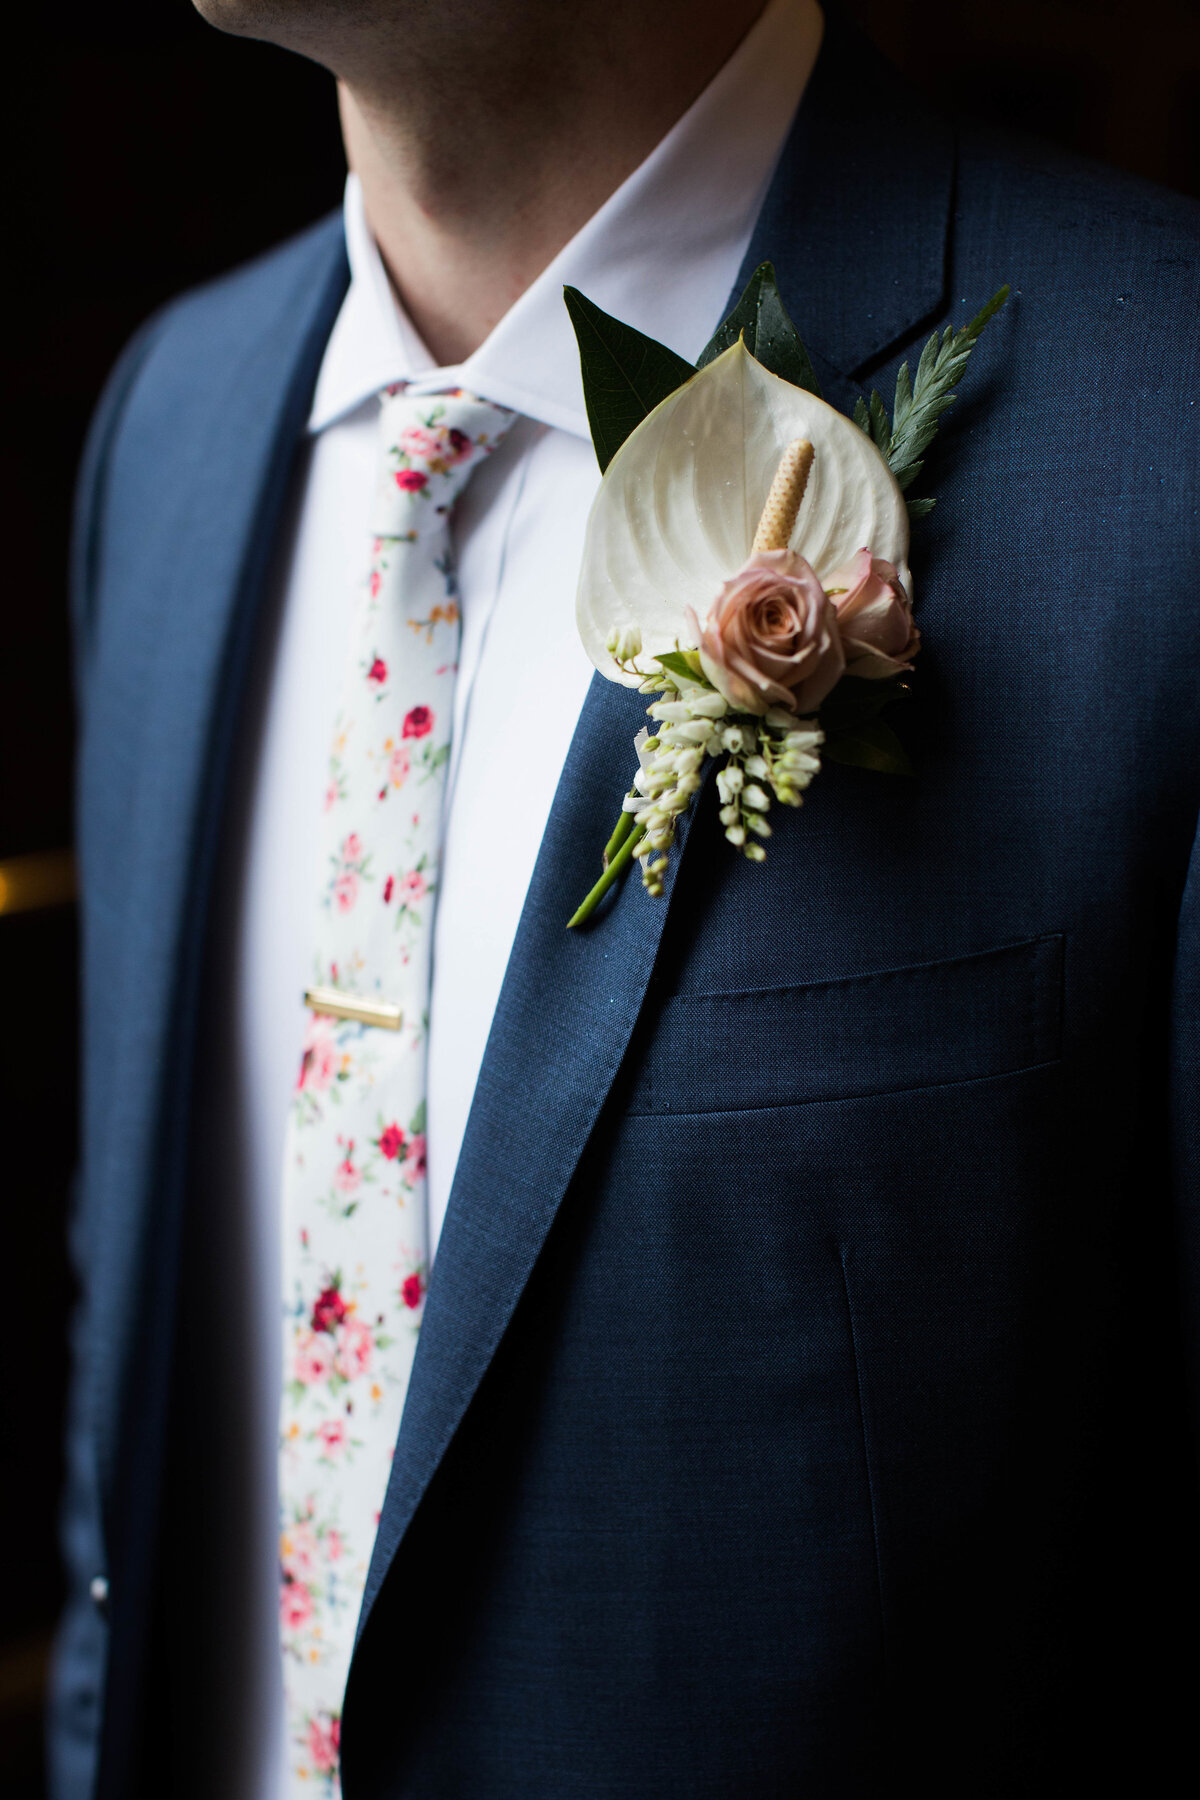 Groom in navy suit with floral tie and boutonniere